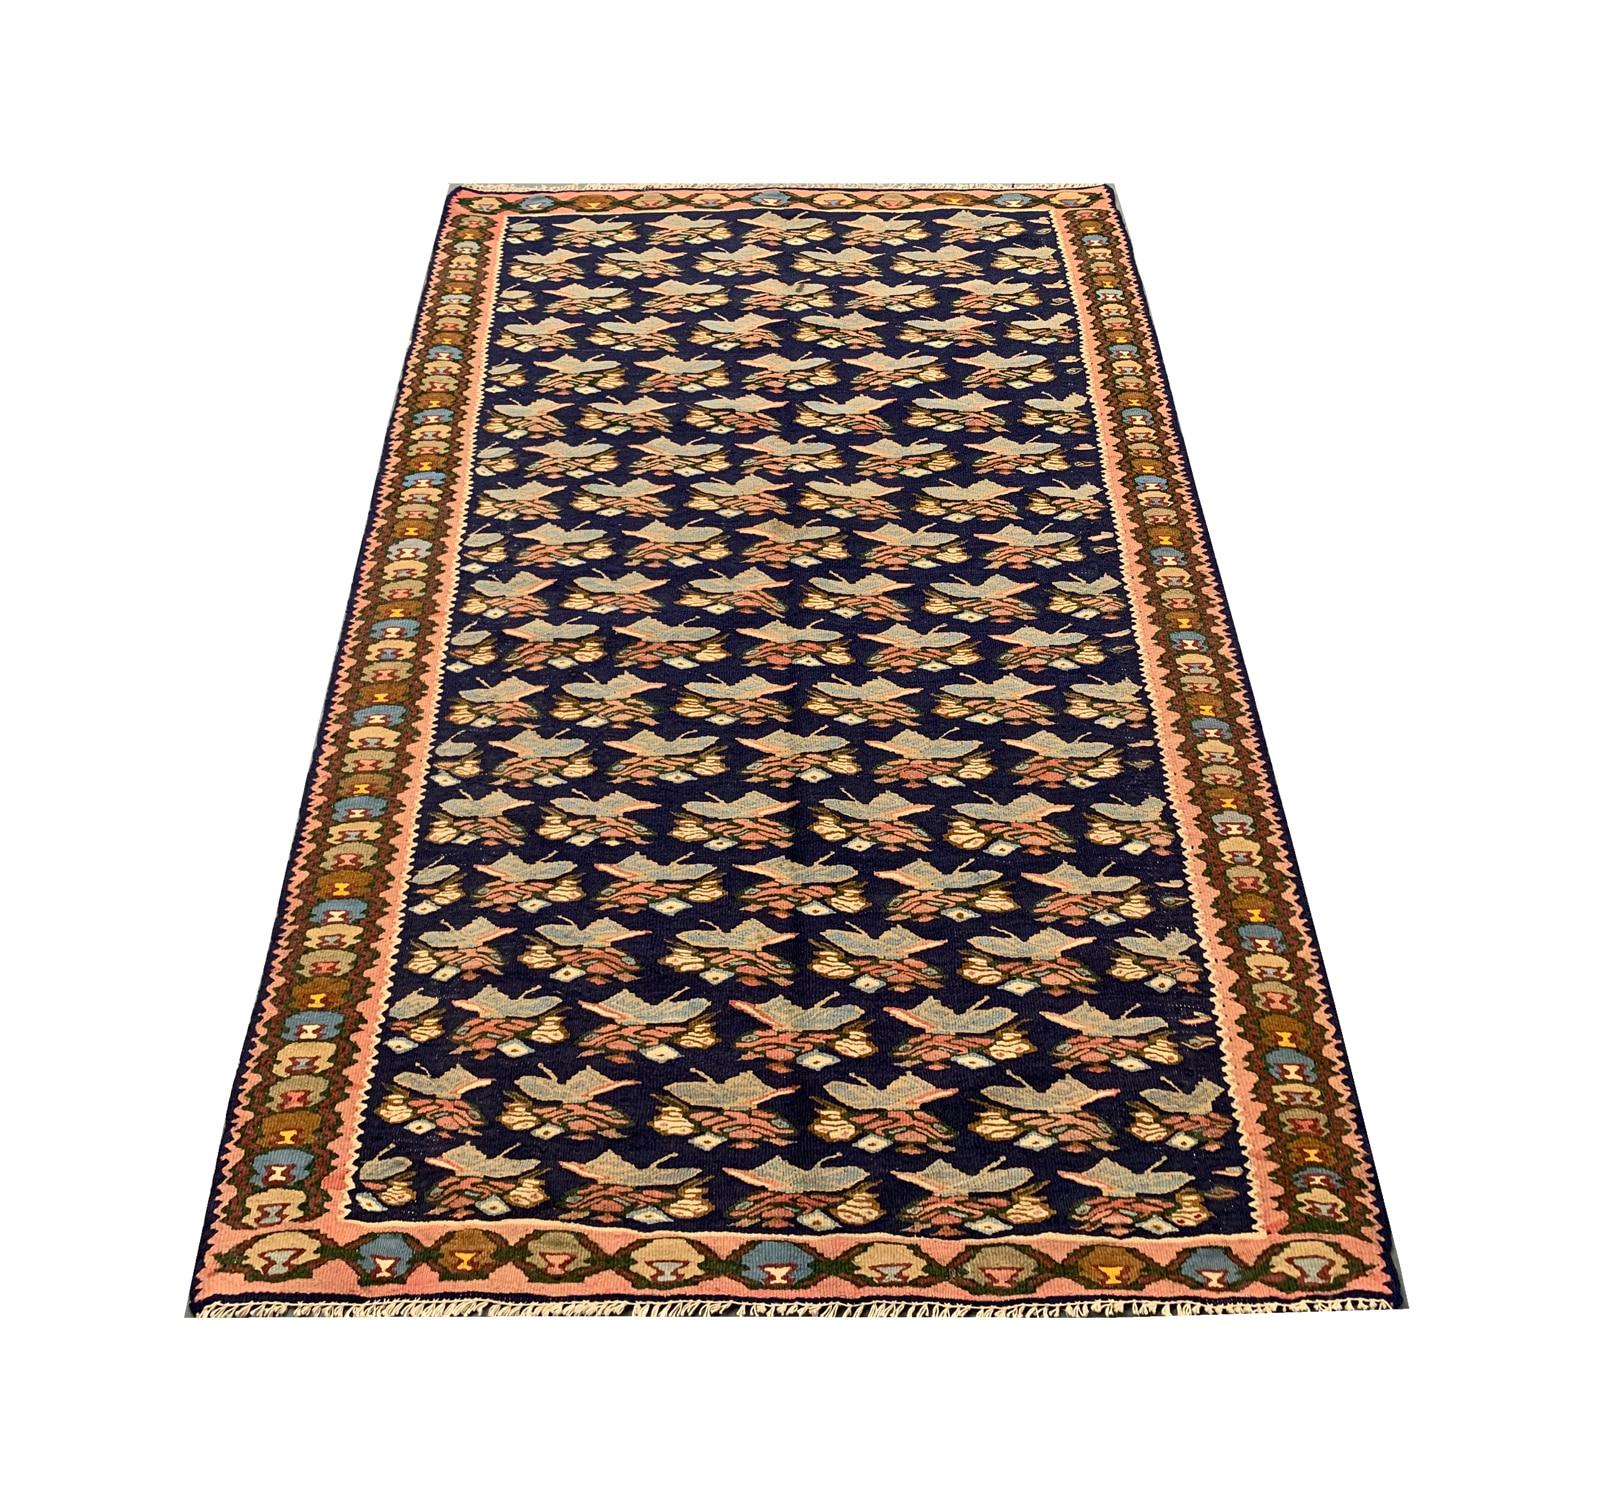 Crafted with meticulous hand-knotting, boasts a fusion of tradition and timeless elegance. The weave exudes a sense of authenticity, setting it apart as a truly exceptional find. The pattern is woven on a terracotta rust-blue background and features